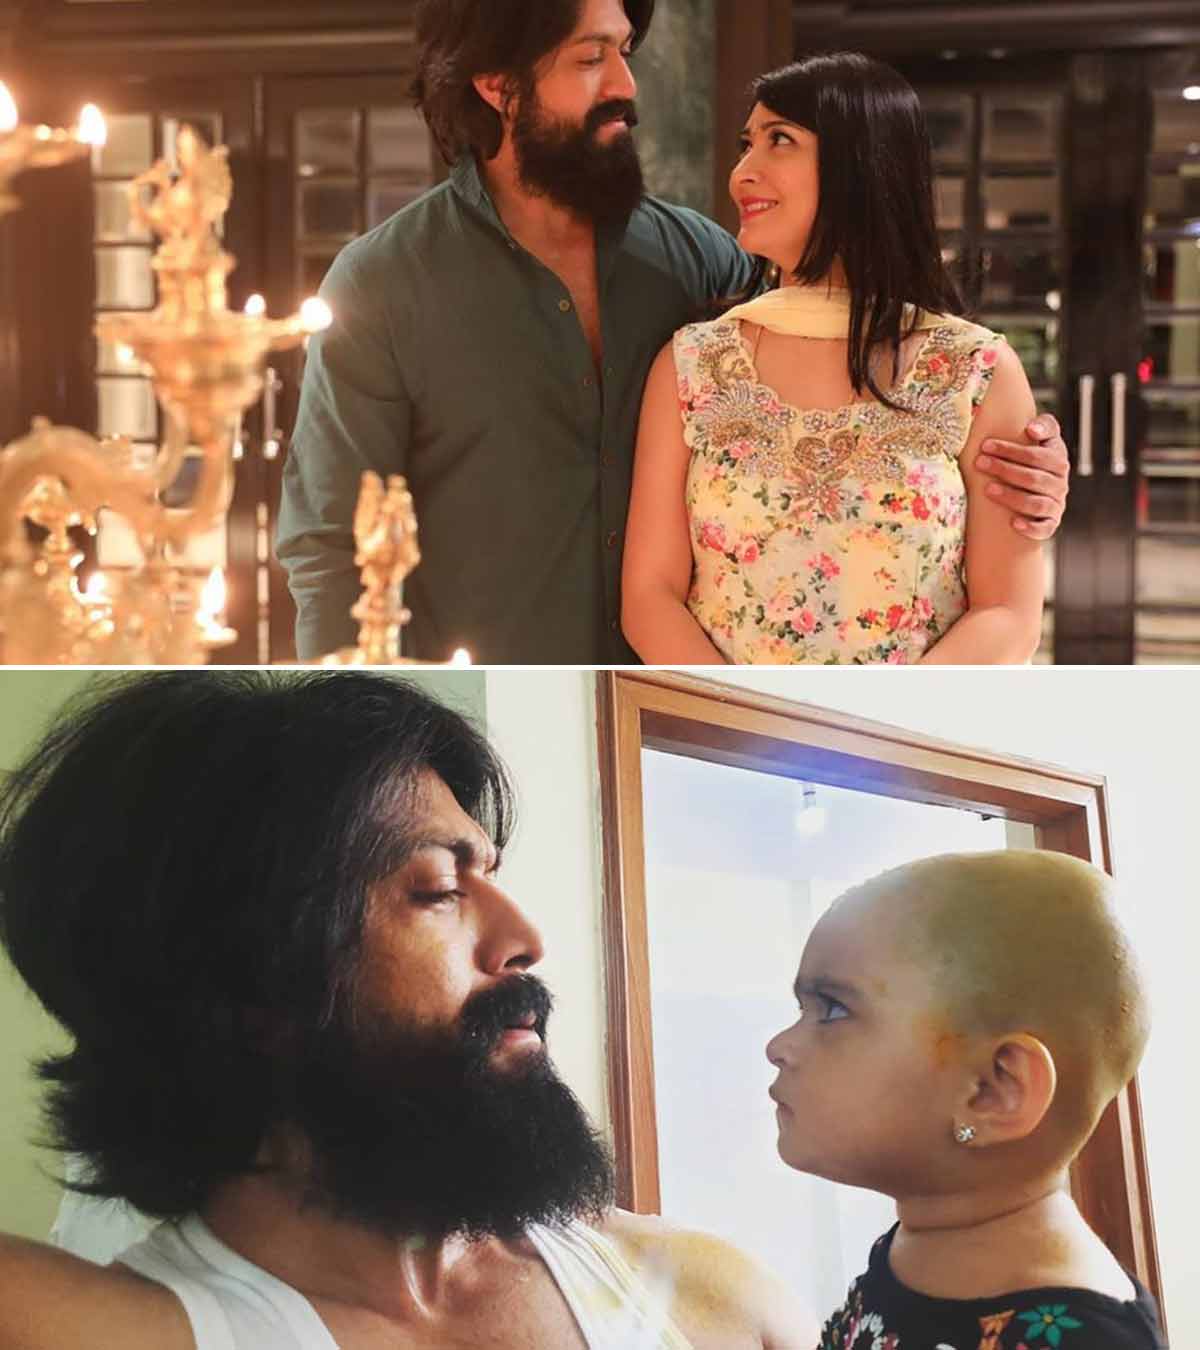 K.G.F Star, Yash's Daughter, Arya Does The Role Reversal And Feeds Food To Her Dad During Lockdown